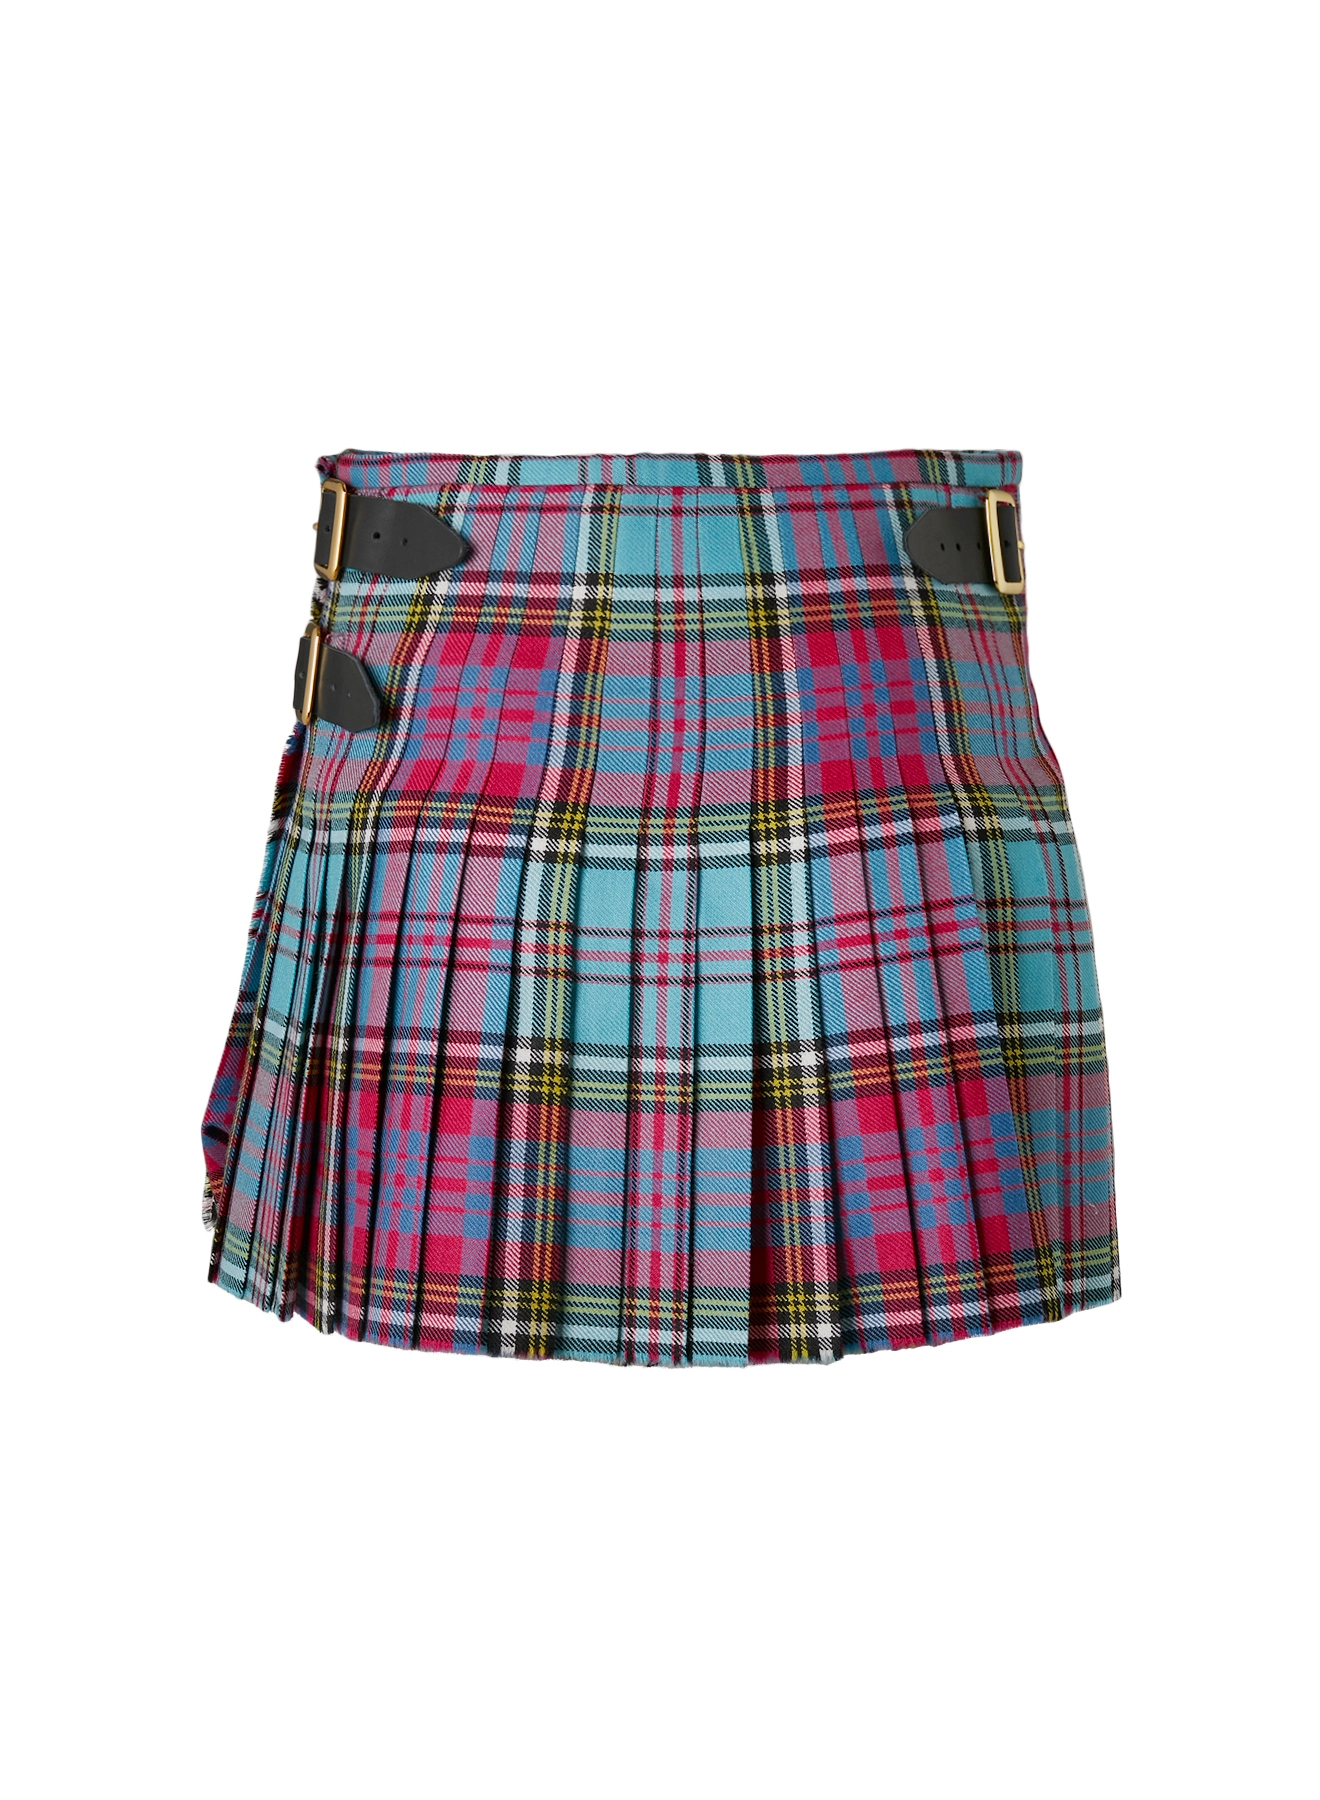 Vivienne Westwood Releases Iconic Limited Edition Kilts | FIB